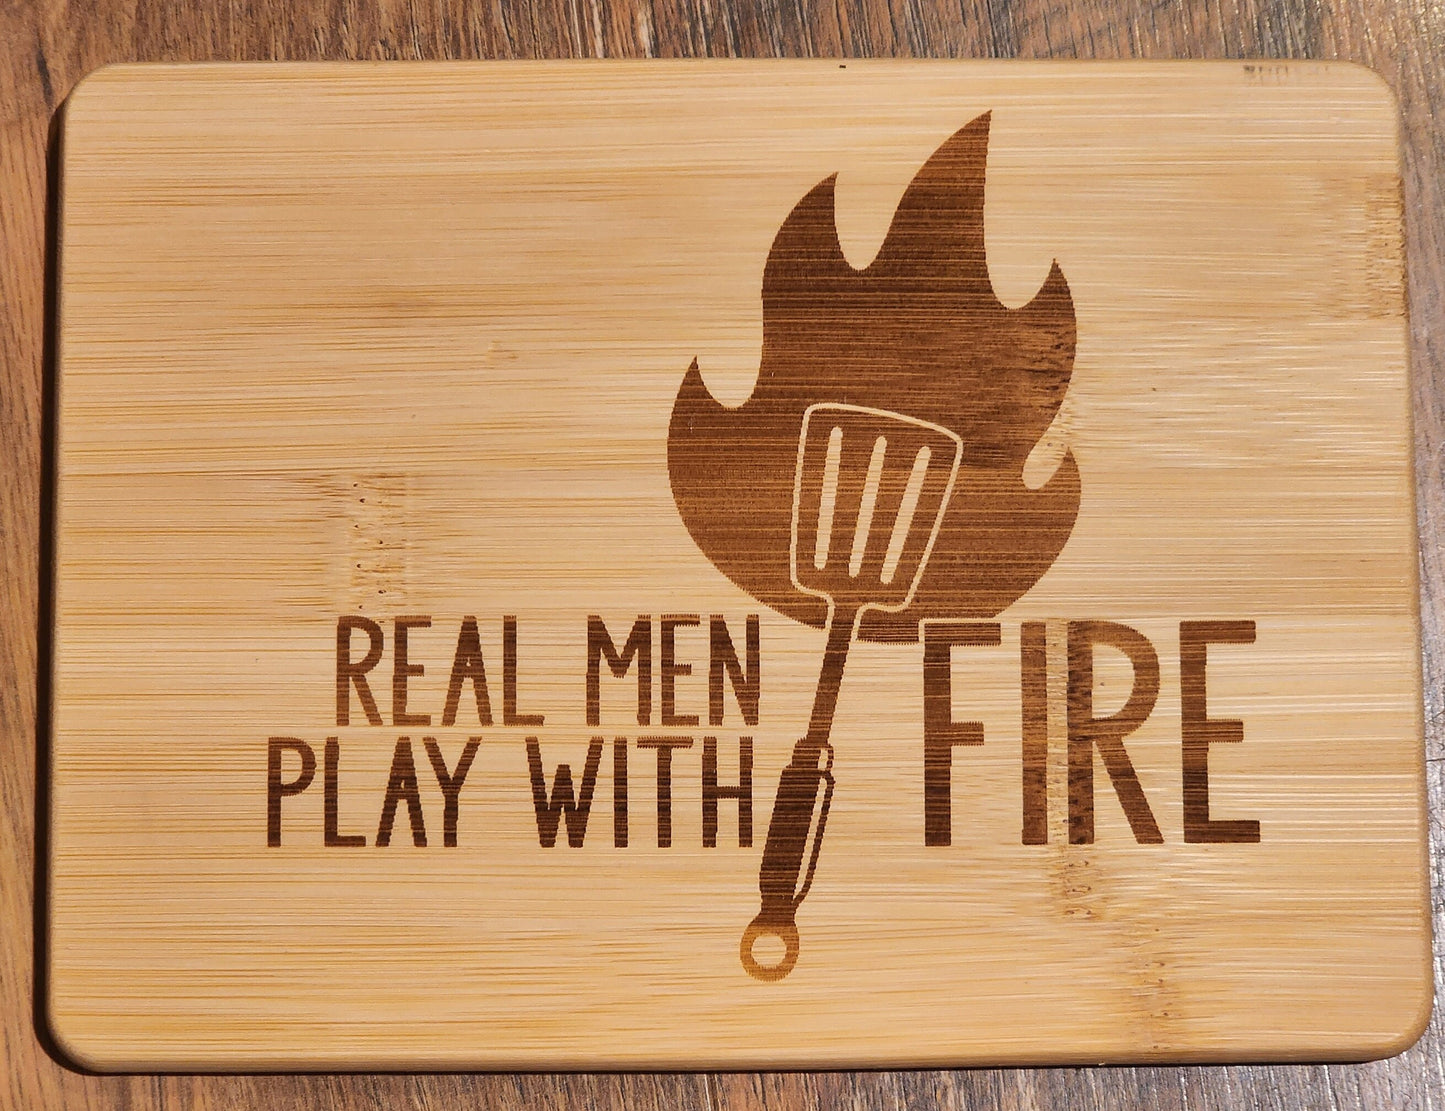 Real Men play with Fire etched Bamboo Wood Cutting Board  - 8.75 x 6.875 inches - Dad BBQ Board